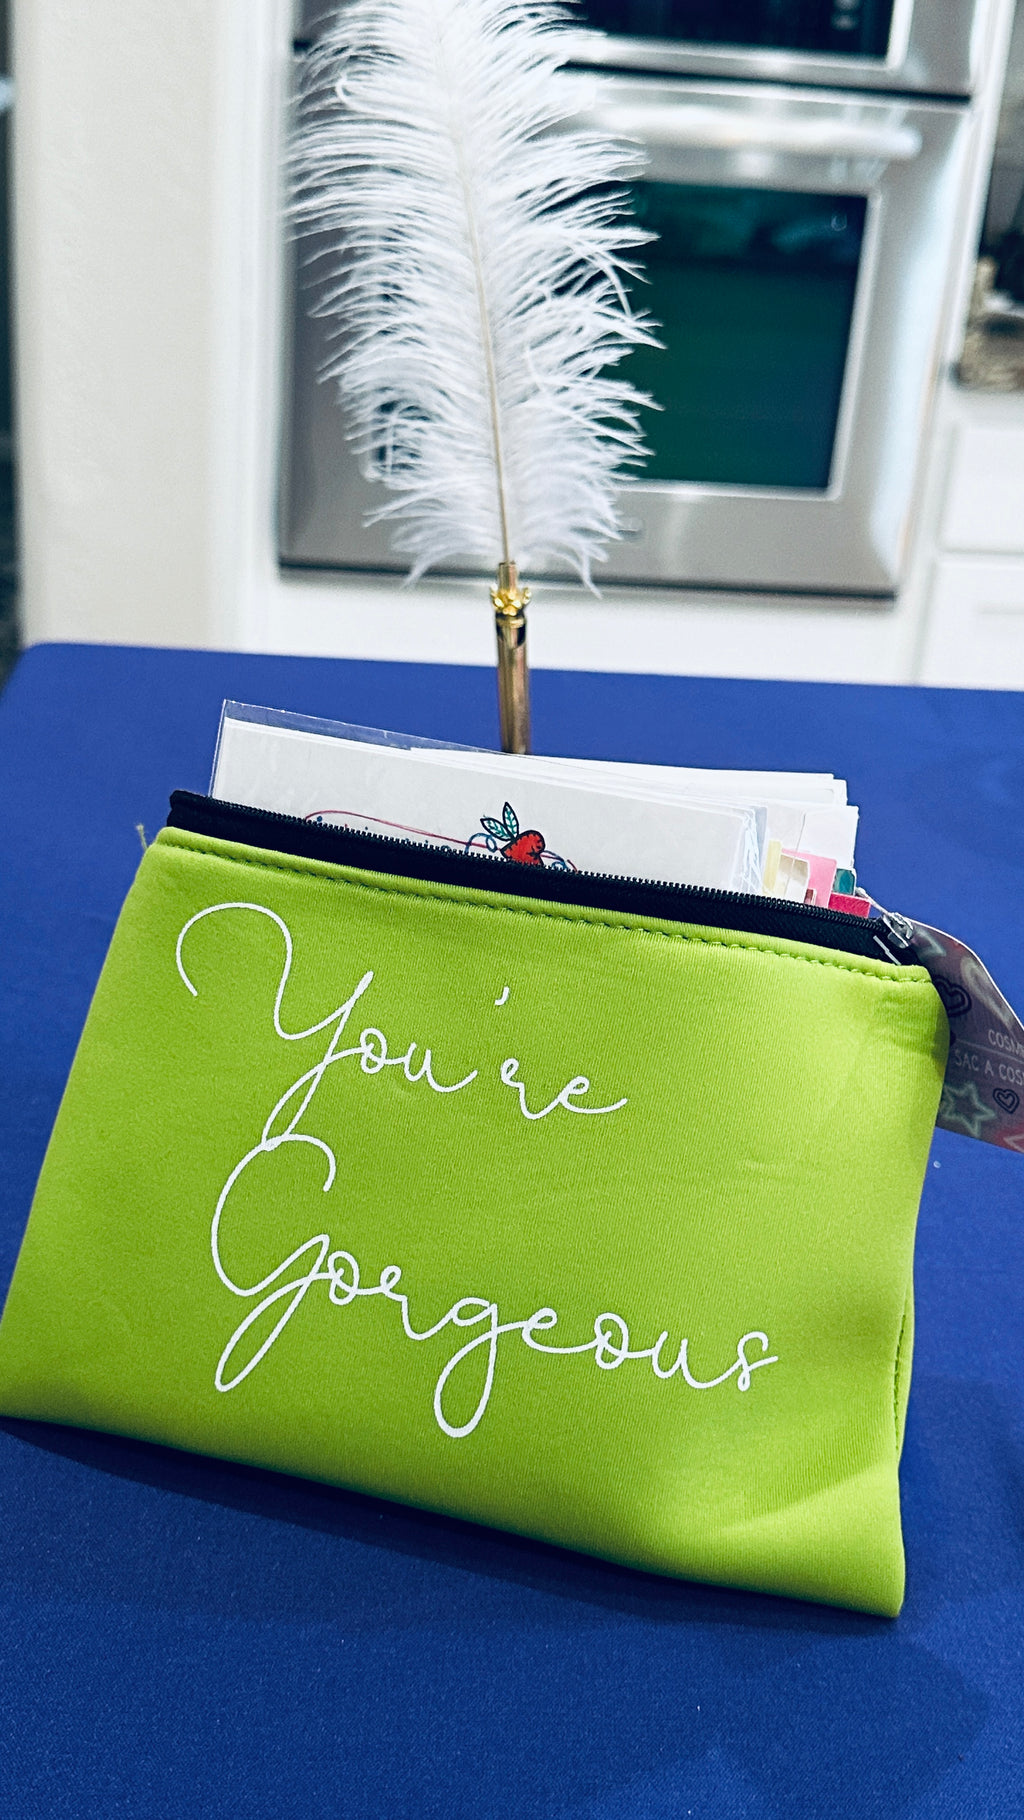 Lime Green "You're Gorgeous" Makeup Bag filled w/ Handmade Cards